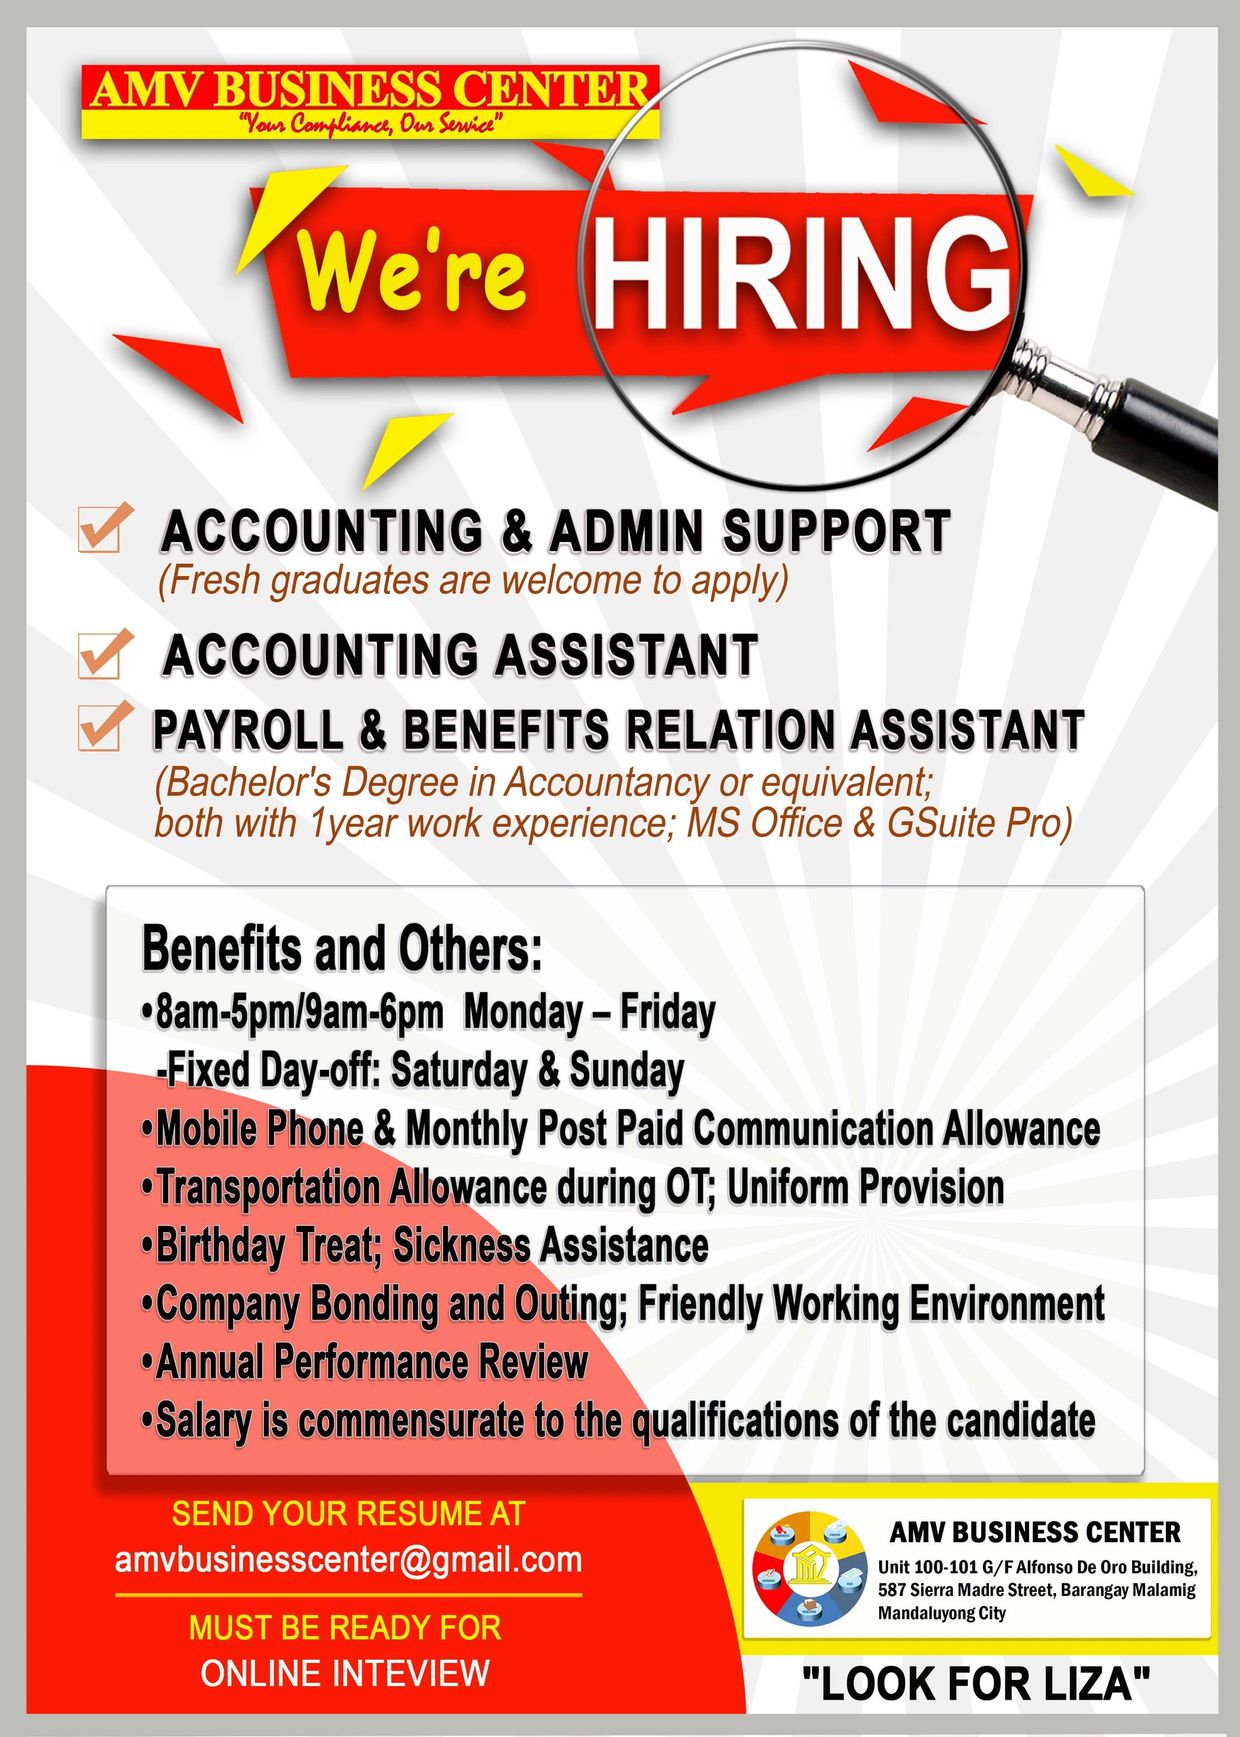 Accounting and Admin Support, Accounting Assistant, Payroll & Benefits Relation Assistant, hiring